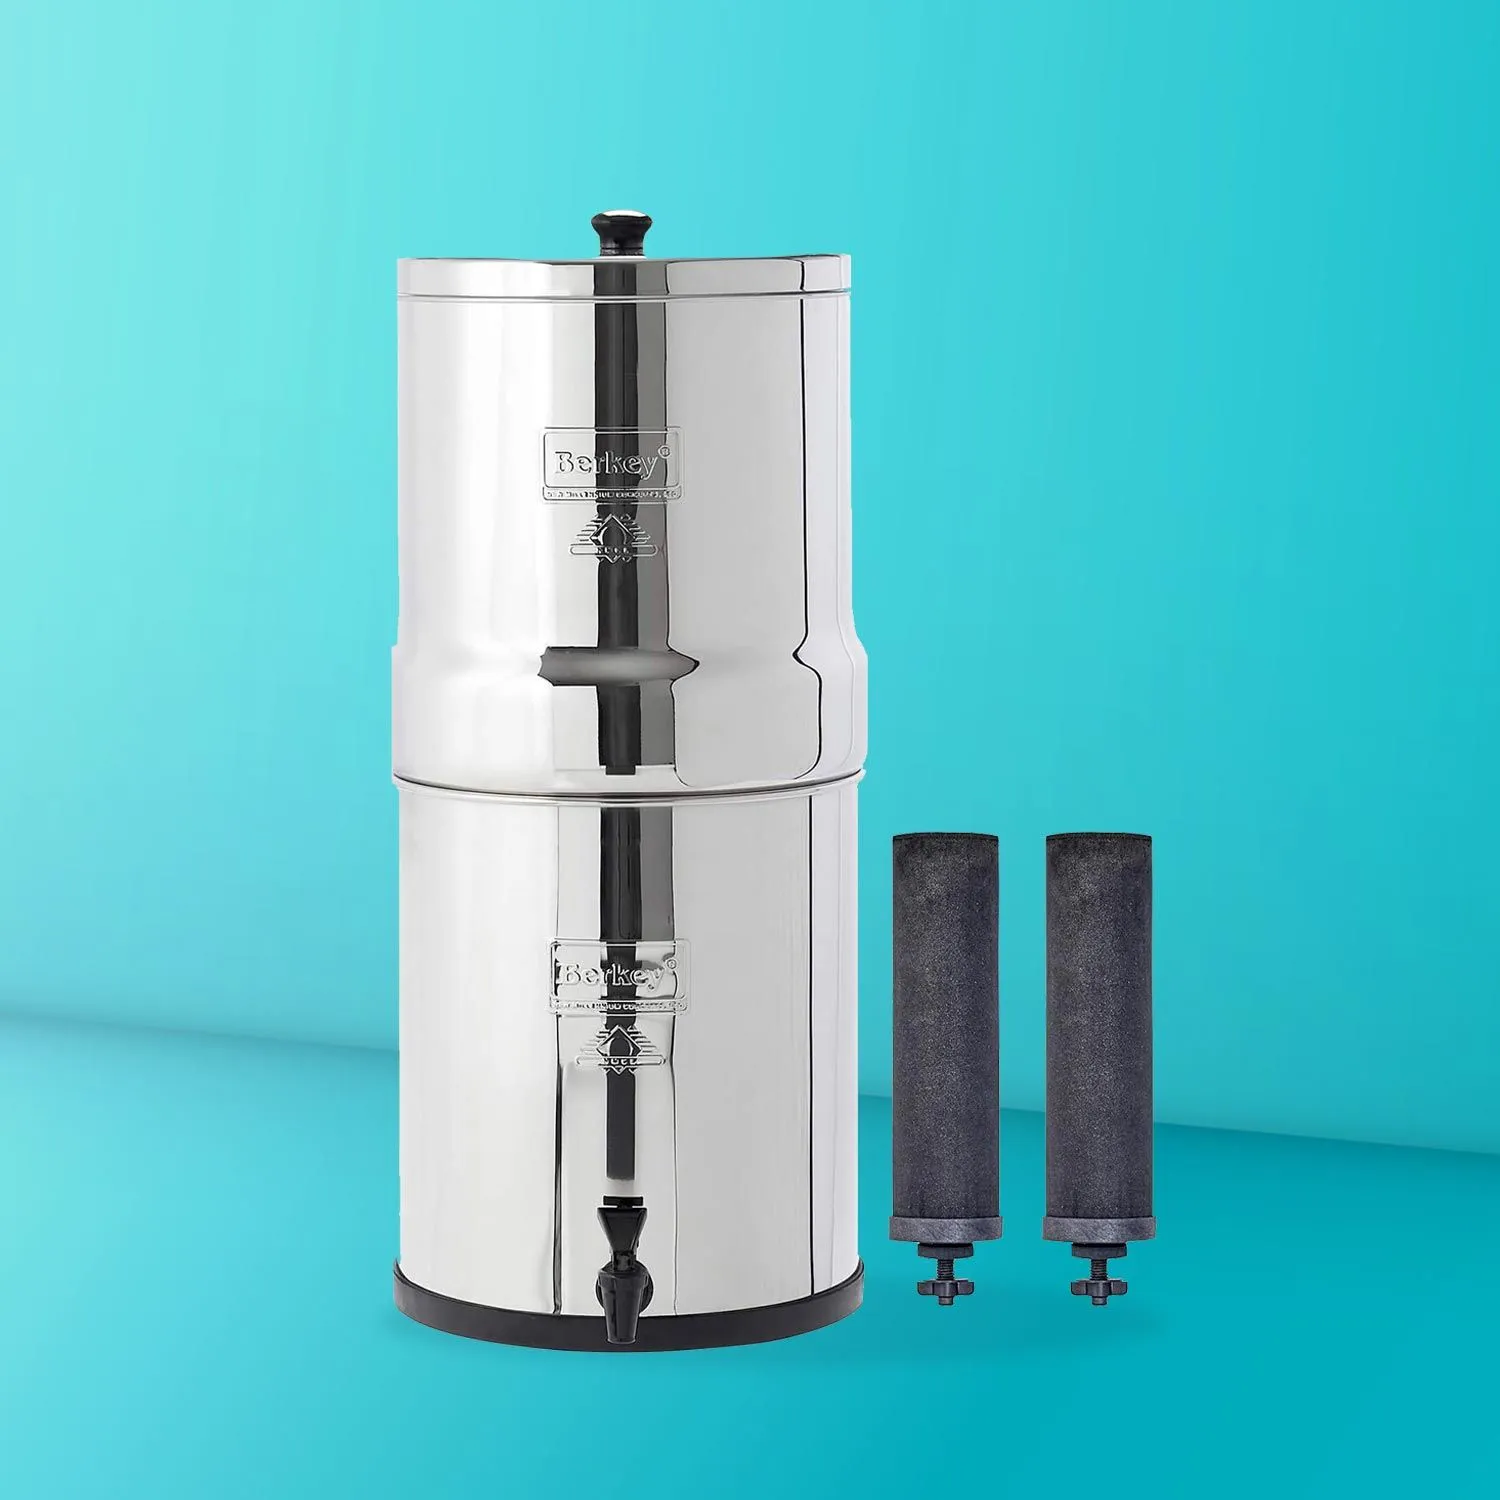 Energize and Purify Unlimited Amounts with the NuWater Filtration System. Clean Countertop Alkaline Water Filter Dispenser 